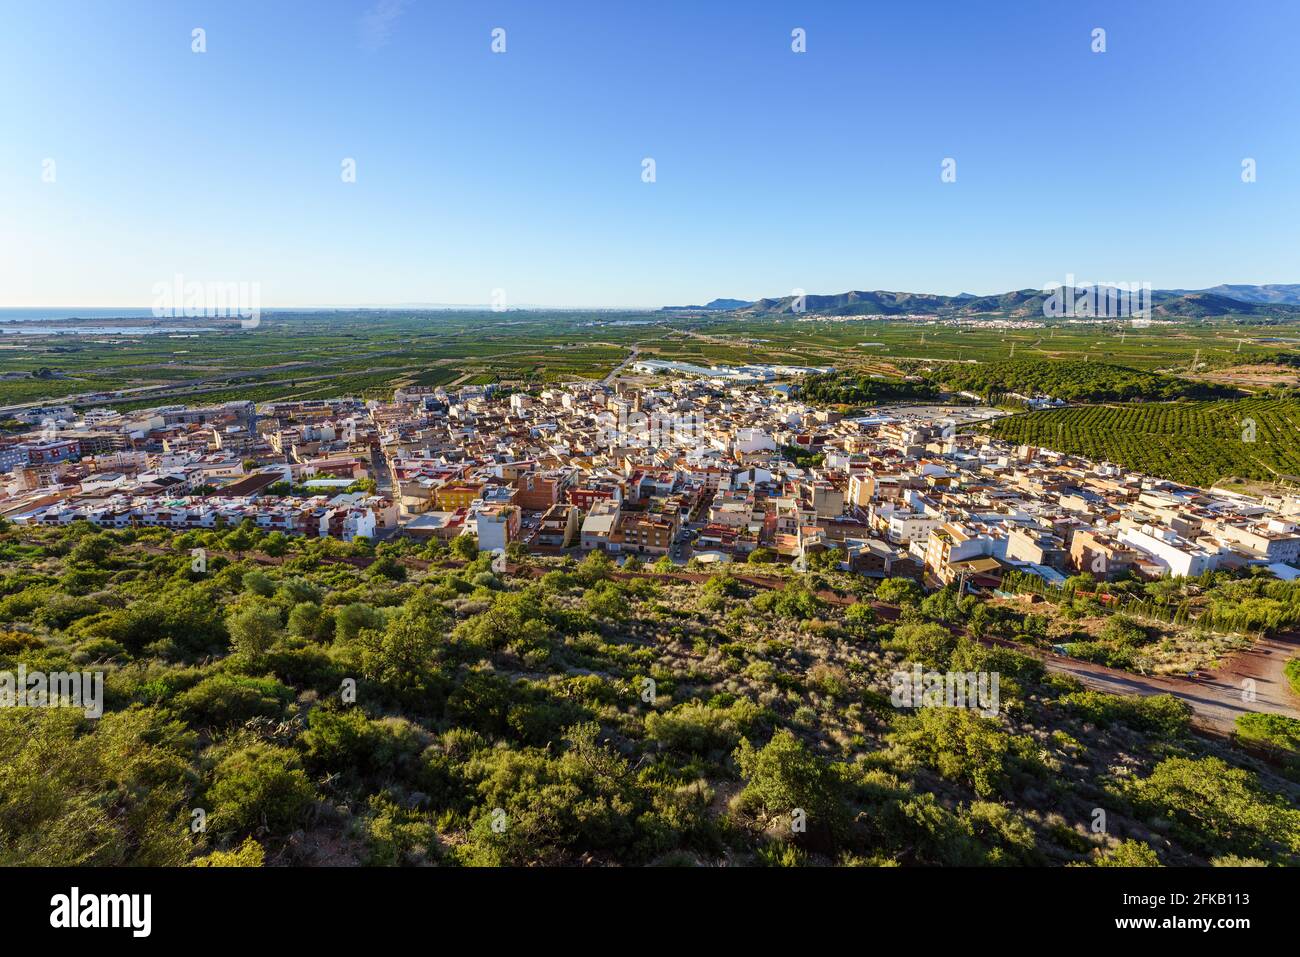 Panoramic view of a town surrounded by green vegetation Stock Photo